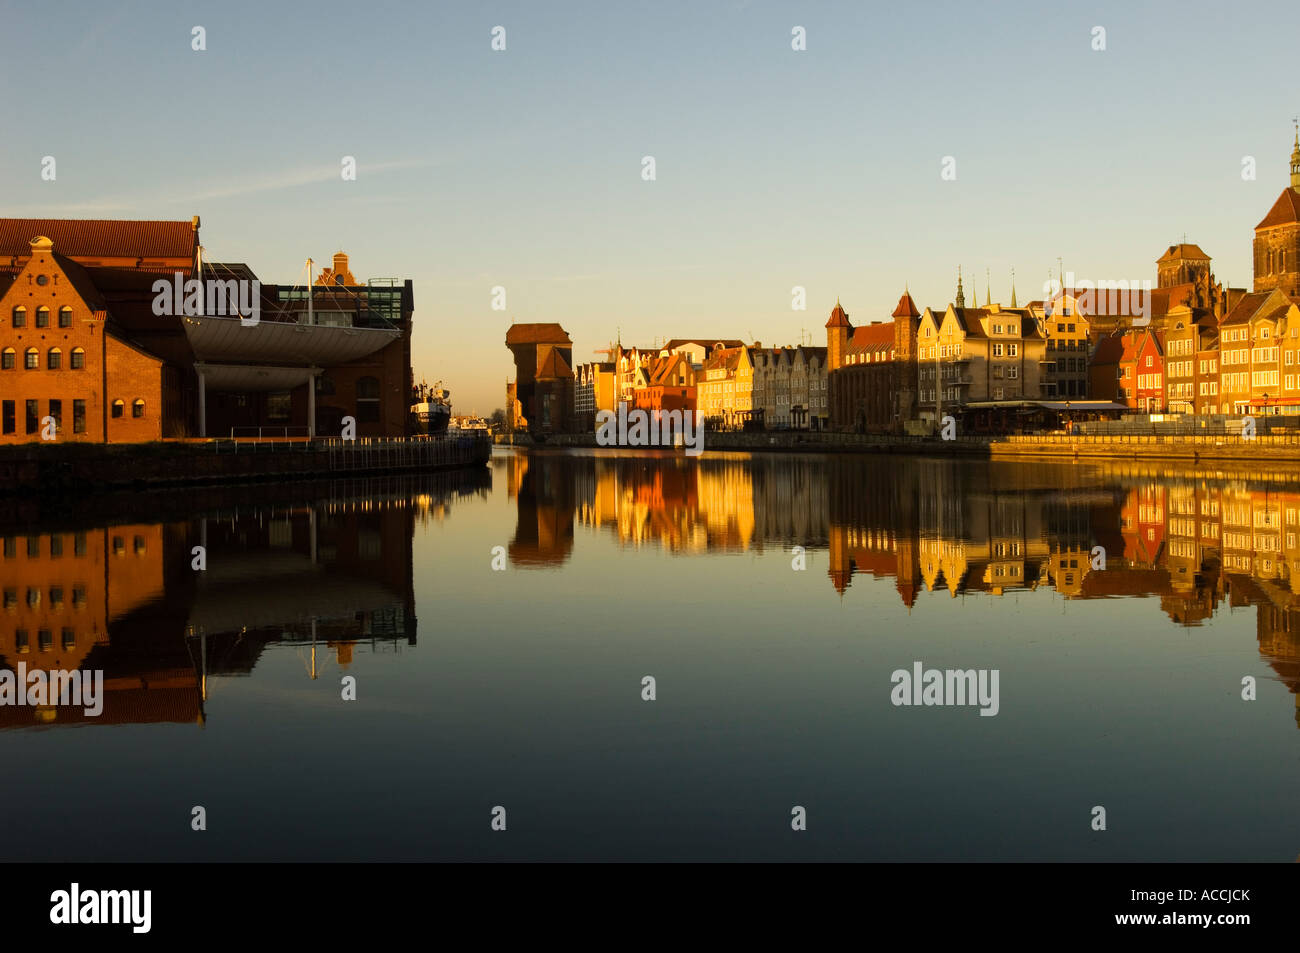 Reflection of town houses of Old Town in Motlawa Canal Gdansk Poland Stock Photo